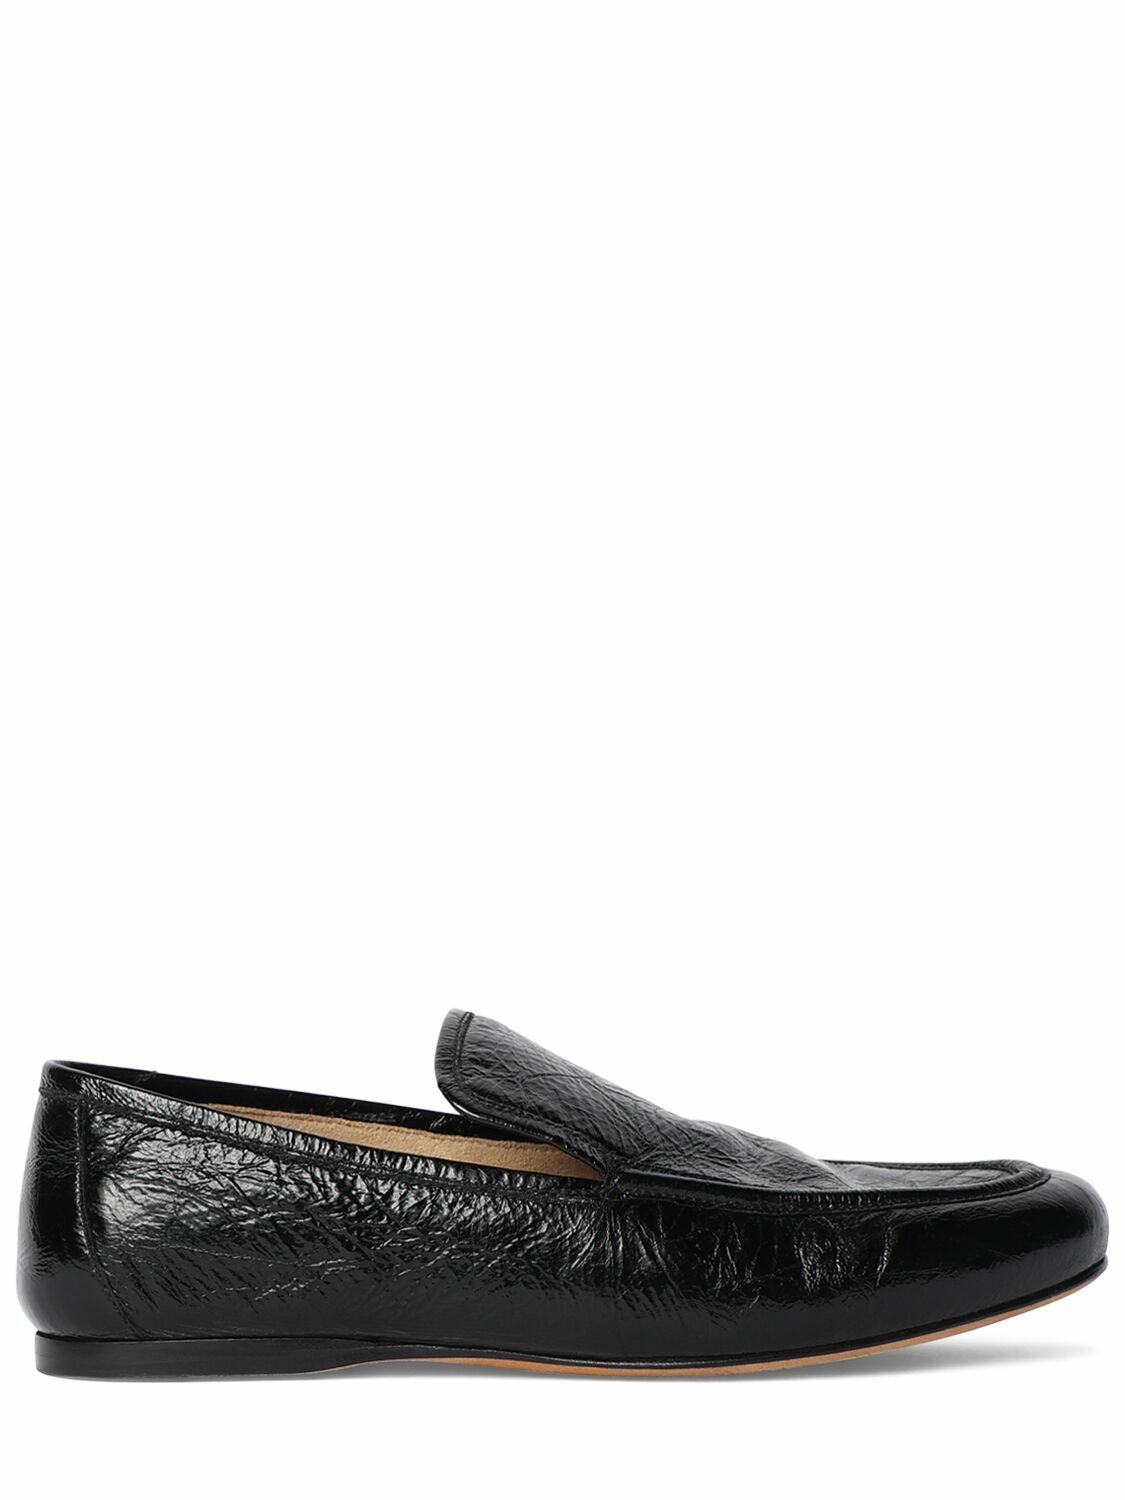 Marfa croc-effect leather loafers in red - Khaite